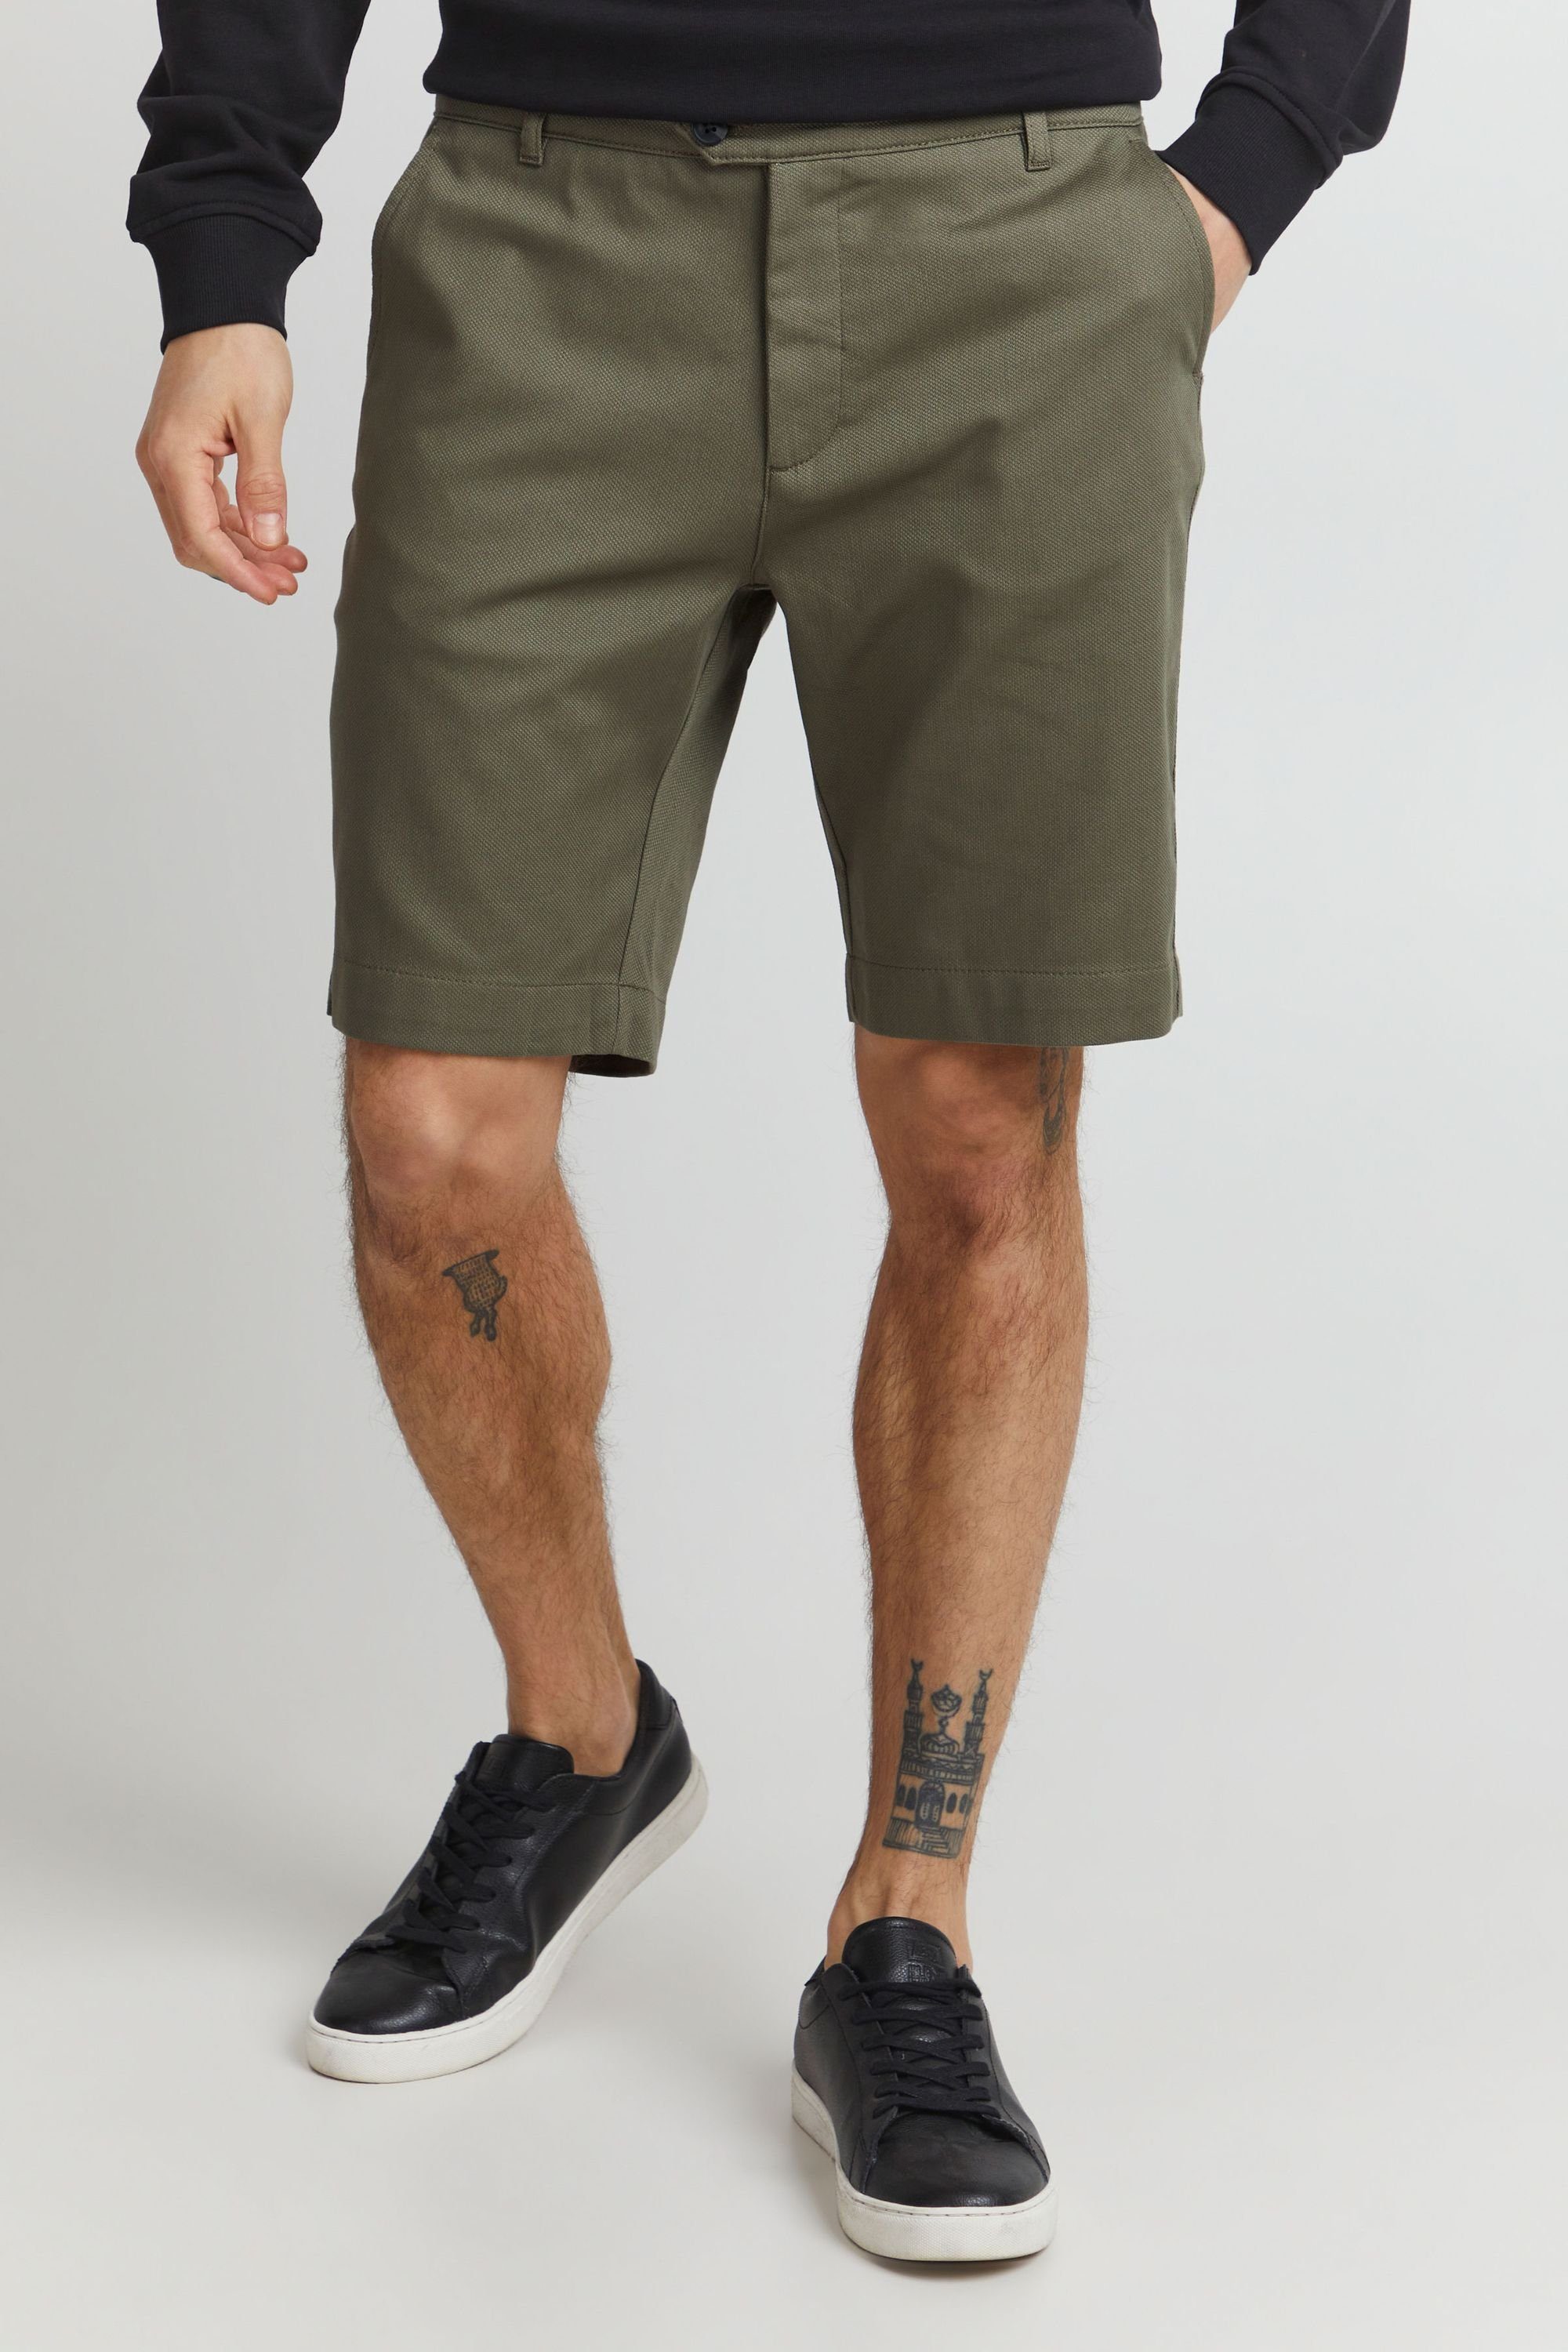 !Solid Shorts SDFred Structure SHO - 21107204 Dusty Olive (180515)